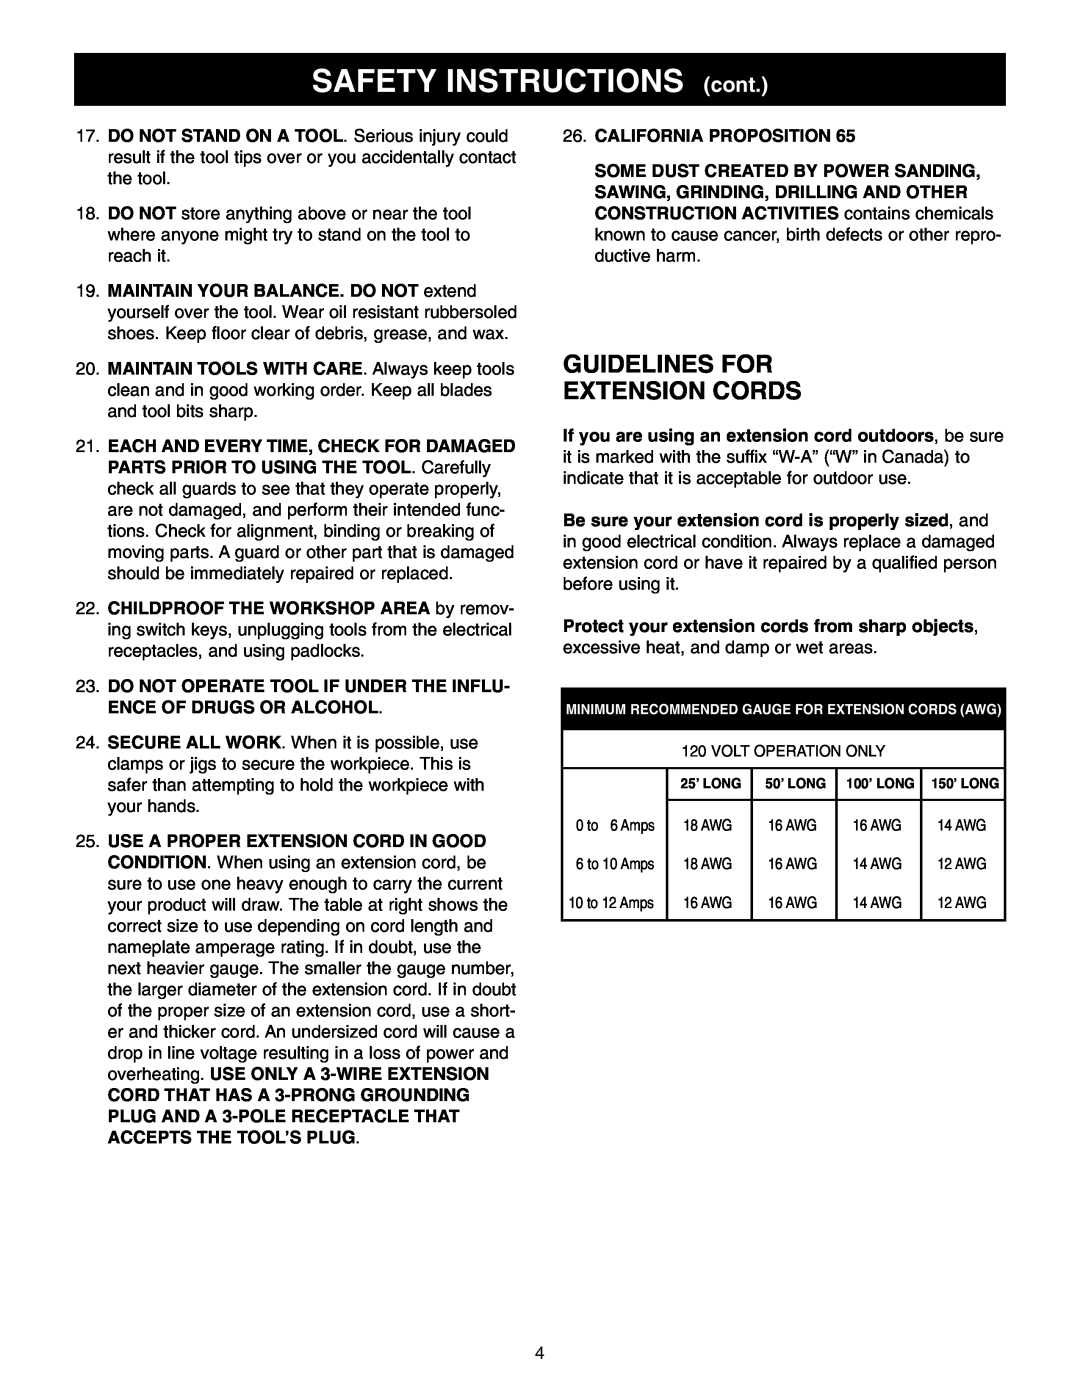 Craftsman 152.22018 owner manual SAFETY INSTRUCTIONS cont, Guidelines For Extension Cords 